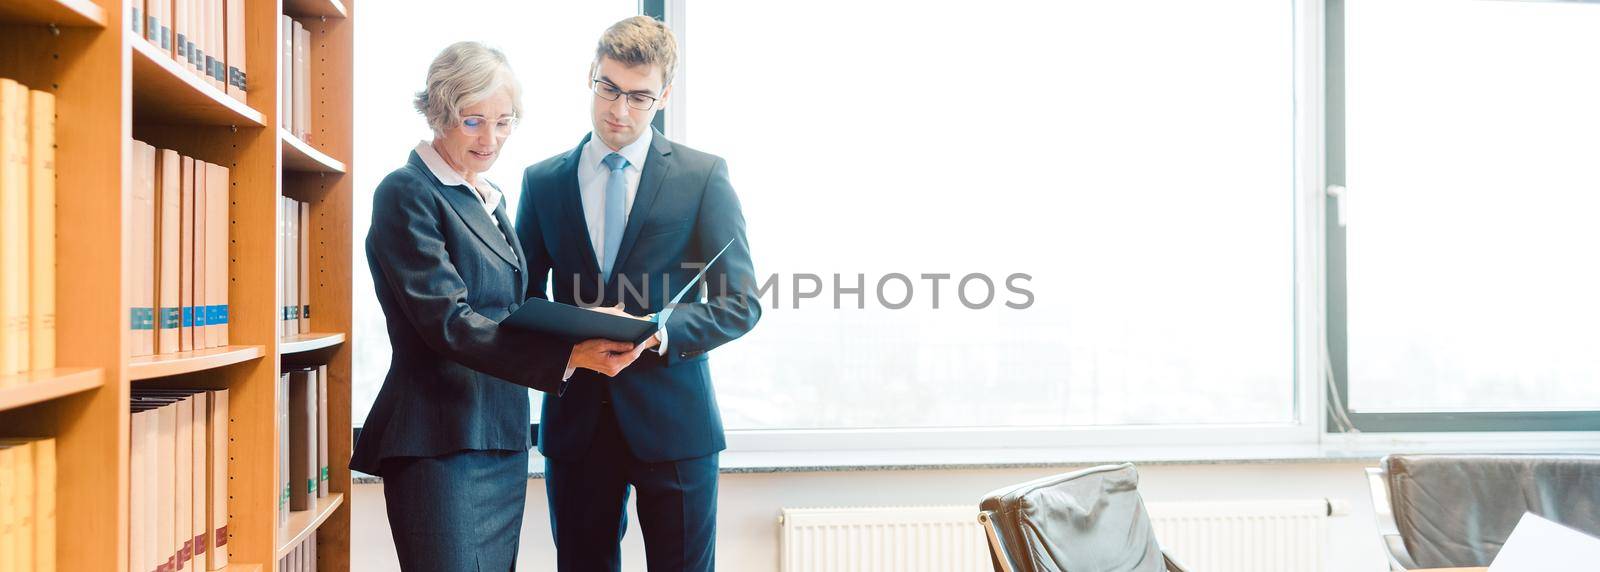 Senior and junior lawyer in law firm discussing strategy in a case reading the file